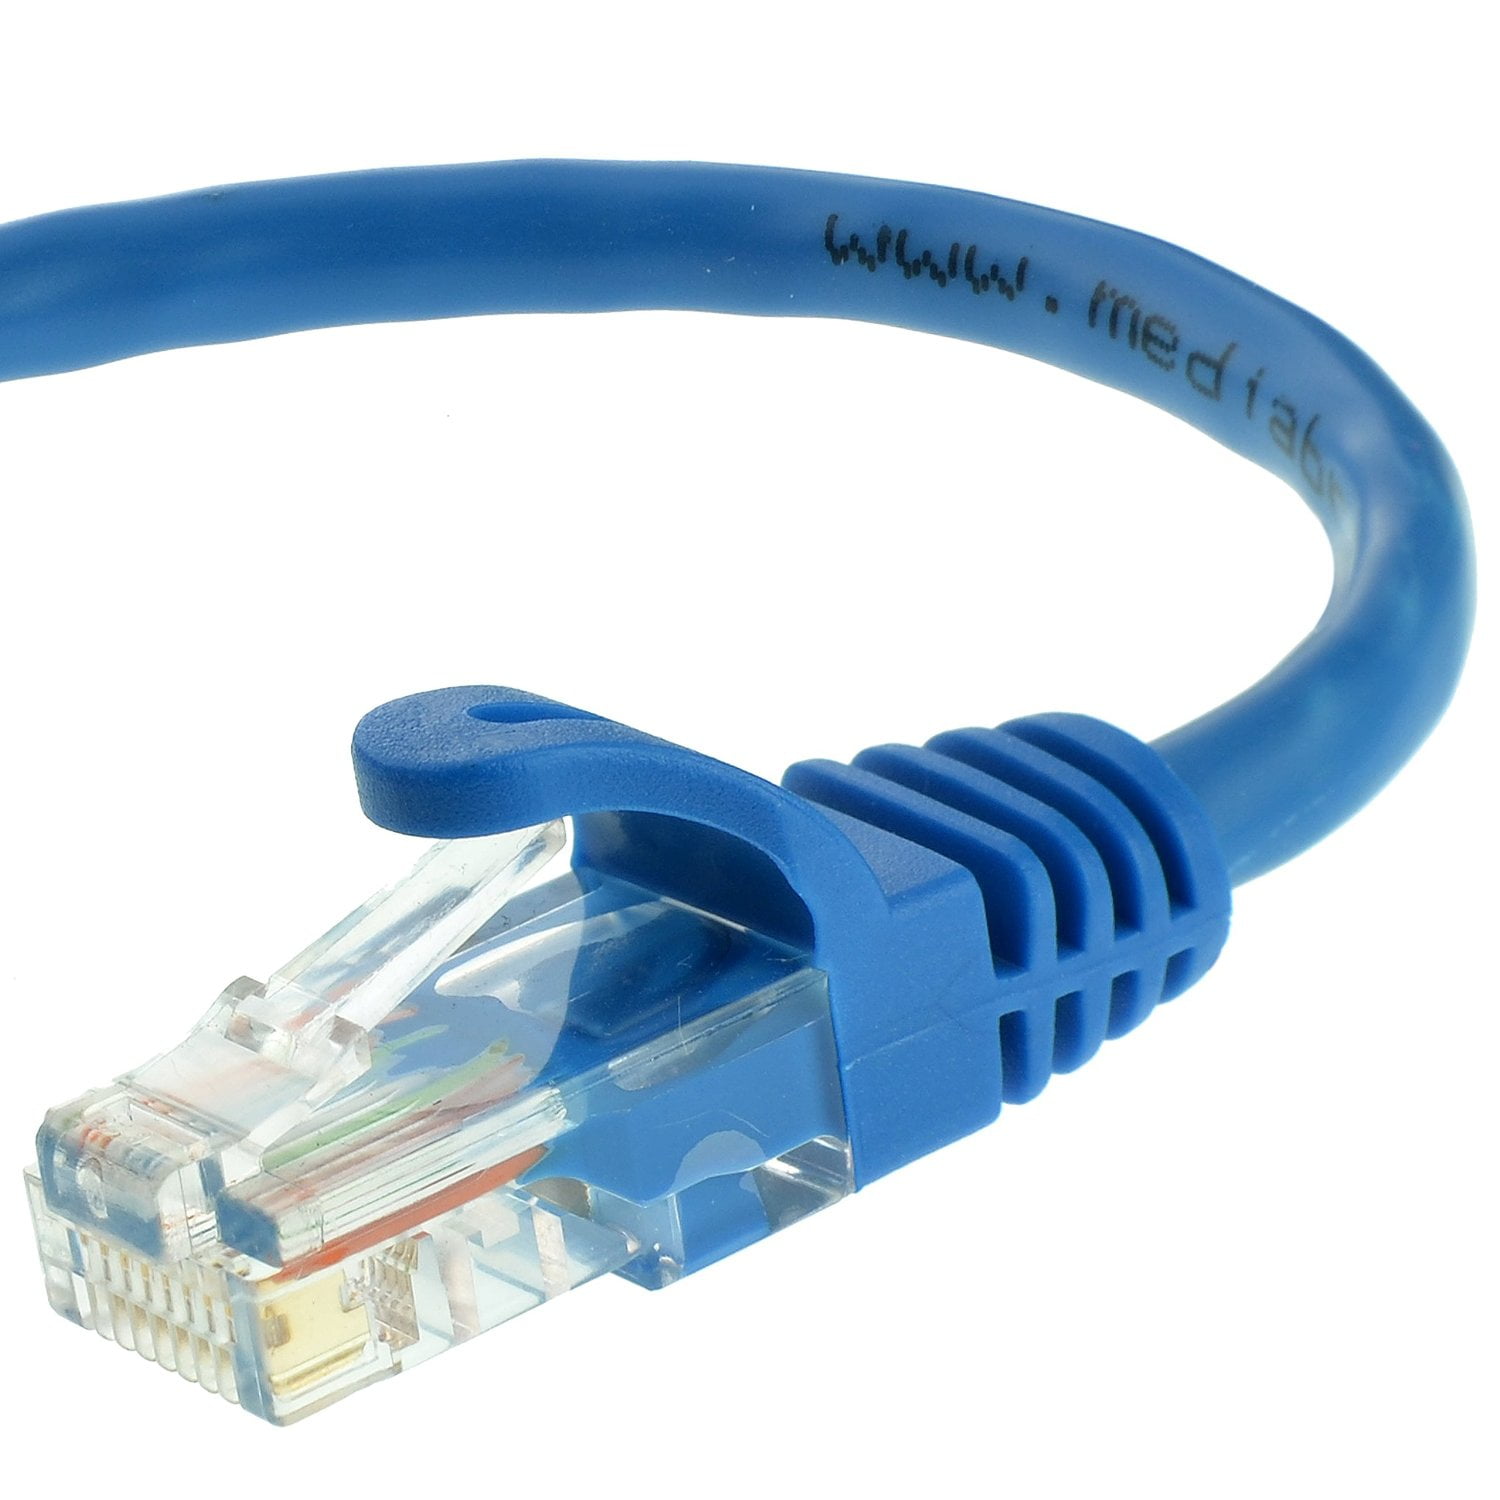 Non-Booted Assembly Comtop Connectivity Solutions Inc. ZNWN4470-05 Orange Color Cablelera 5 Category 5e UTP Network Patch Cable 